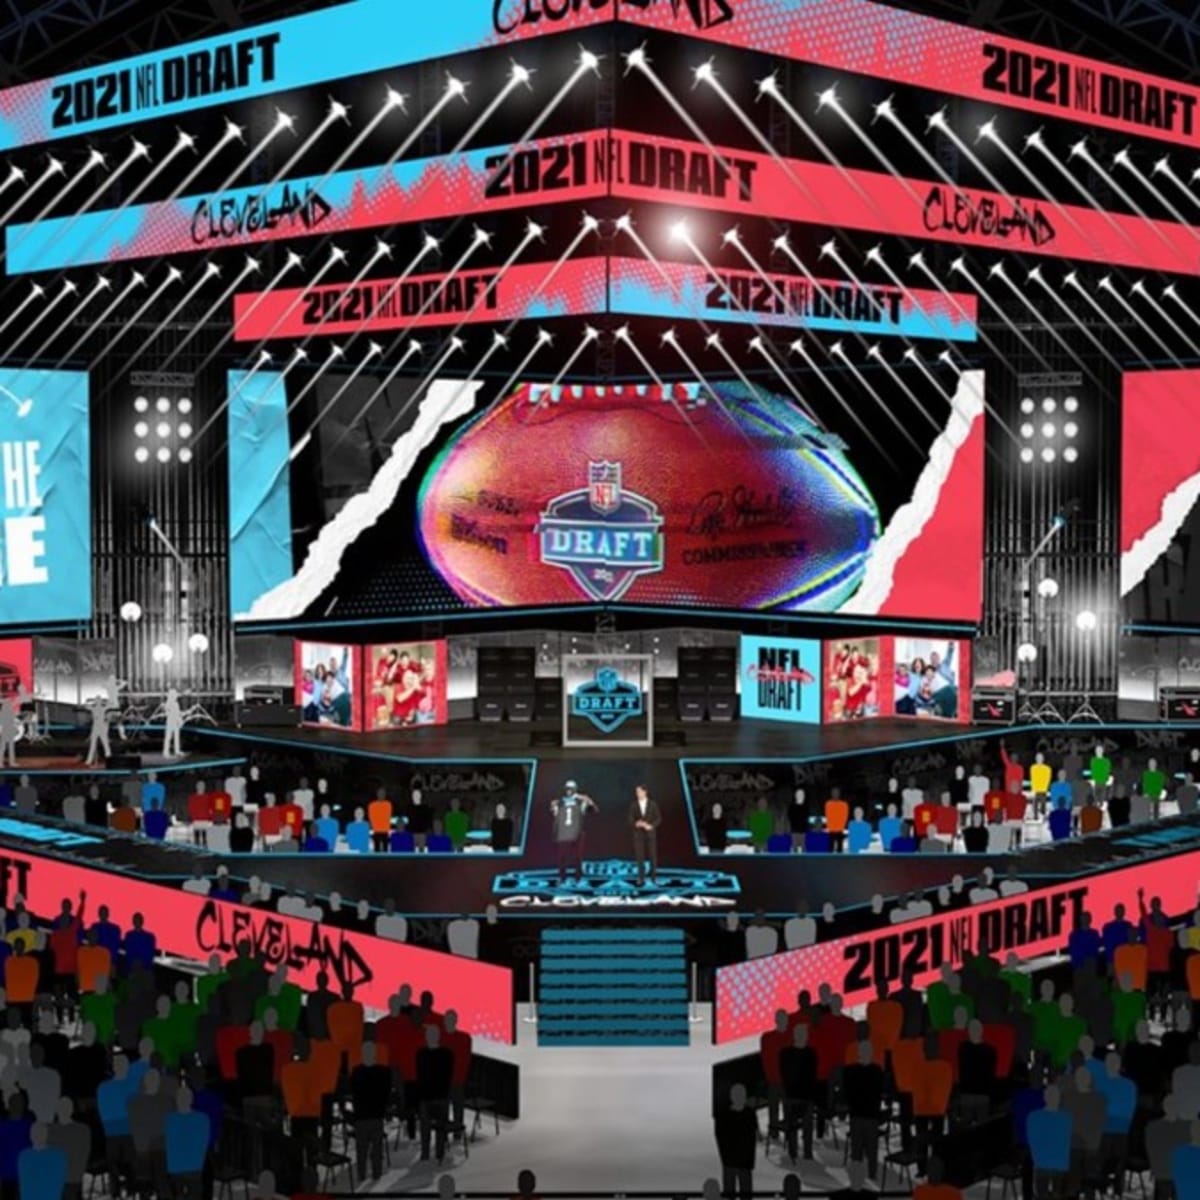 NFL ONEPASS APP LAUNCHES FOR FANS TO RESERVE TICKETS TO NFL DRAFT